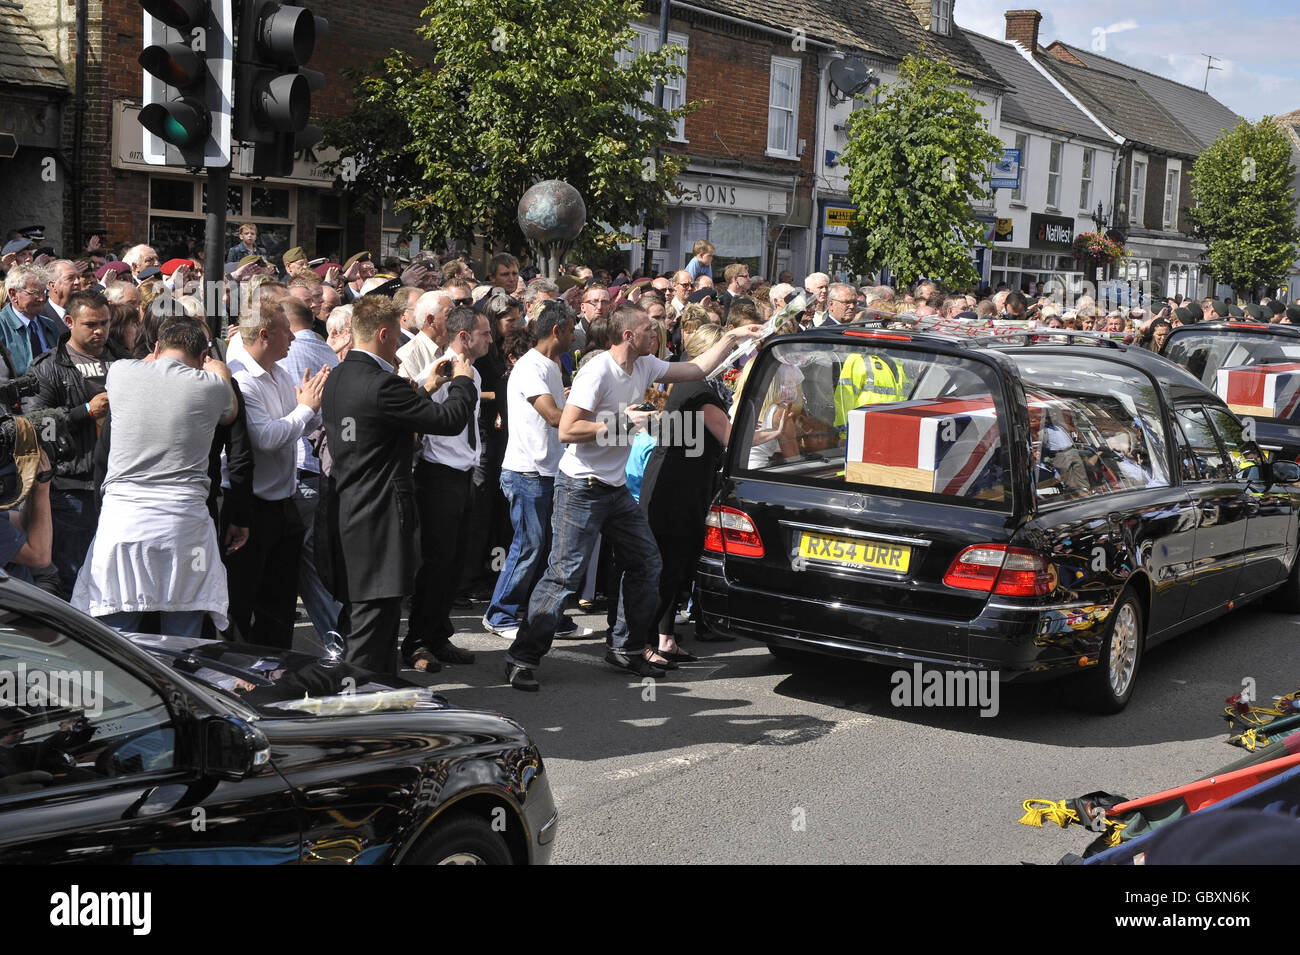 Mourners throw flowers as eight hearses carrying the bodies of eight British soldiers killed during the Army's bloodiest 24 hours in Afghanistan, make their way through the Wiltshire village of Wootton Bassett. Stock Photo